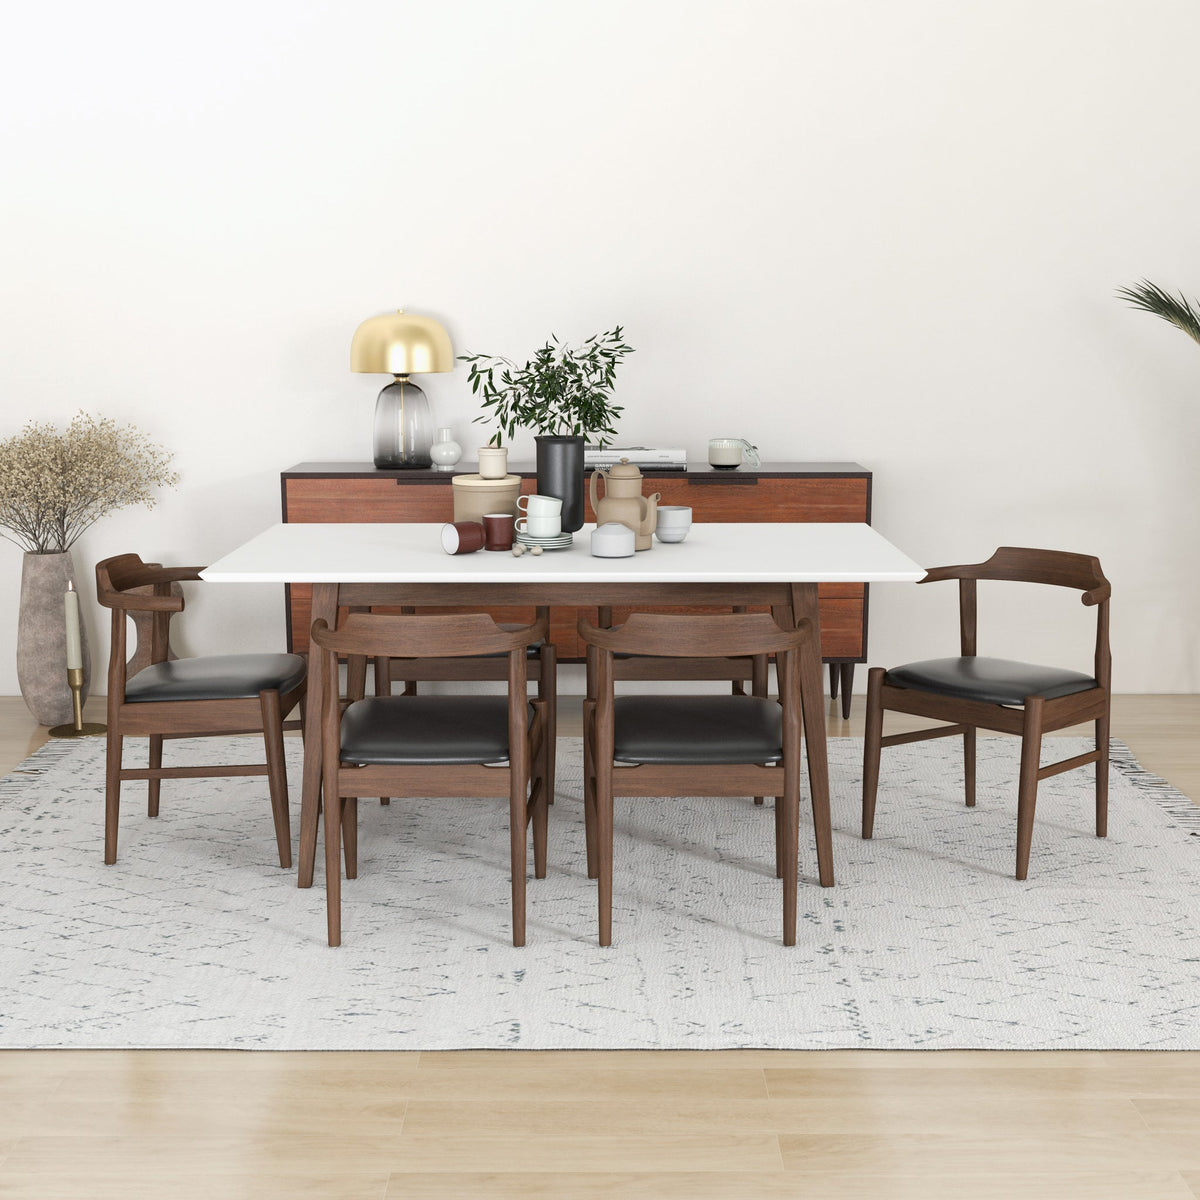 Dining Set, Alpine Large WHITE Table with 6 Zola Black Leather Chairs | Mid in Mod | Houston TX | Best Furniture stores in Houston